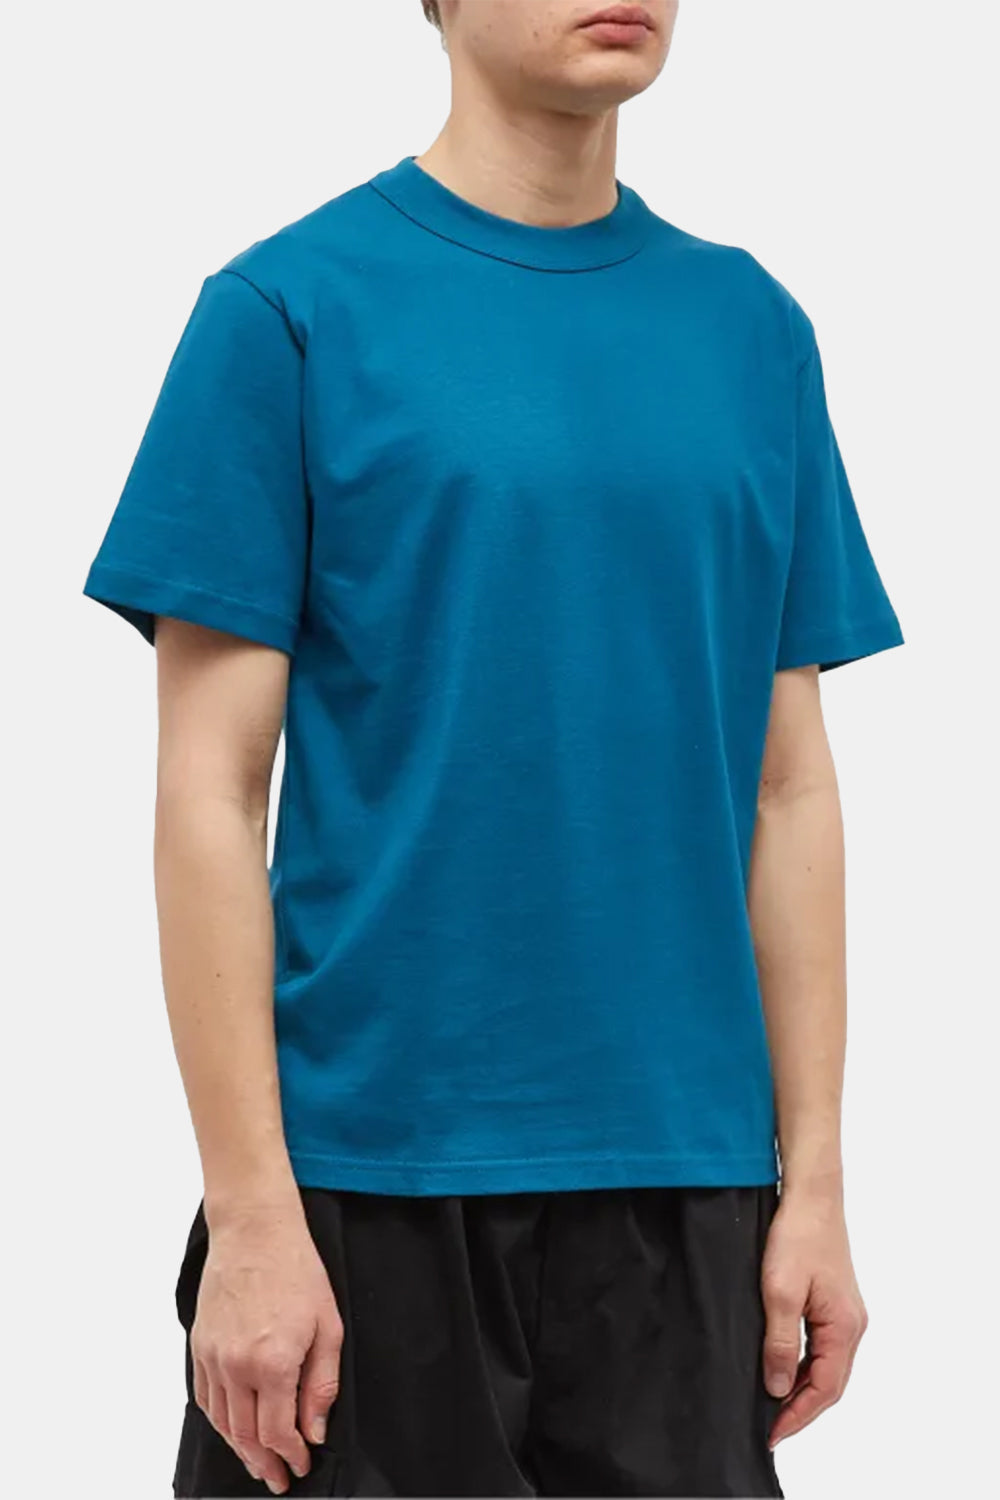 Armor Lux Heritage Organic Callac T-Shirt (Glacial Blue)
